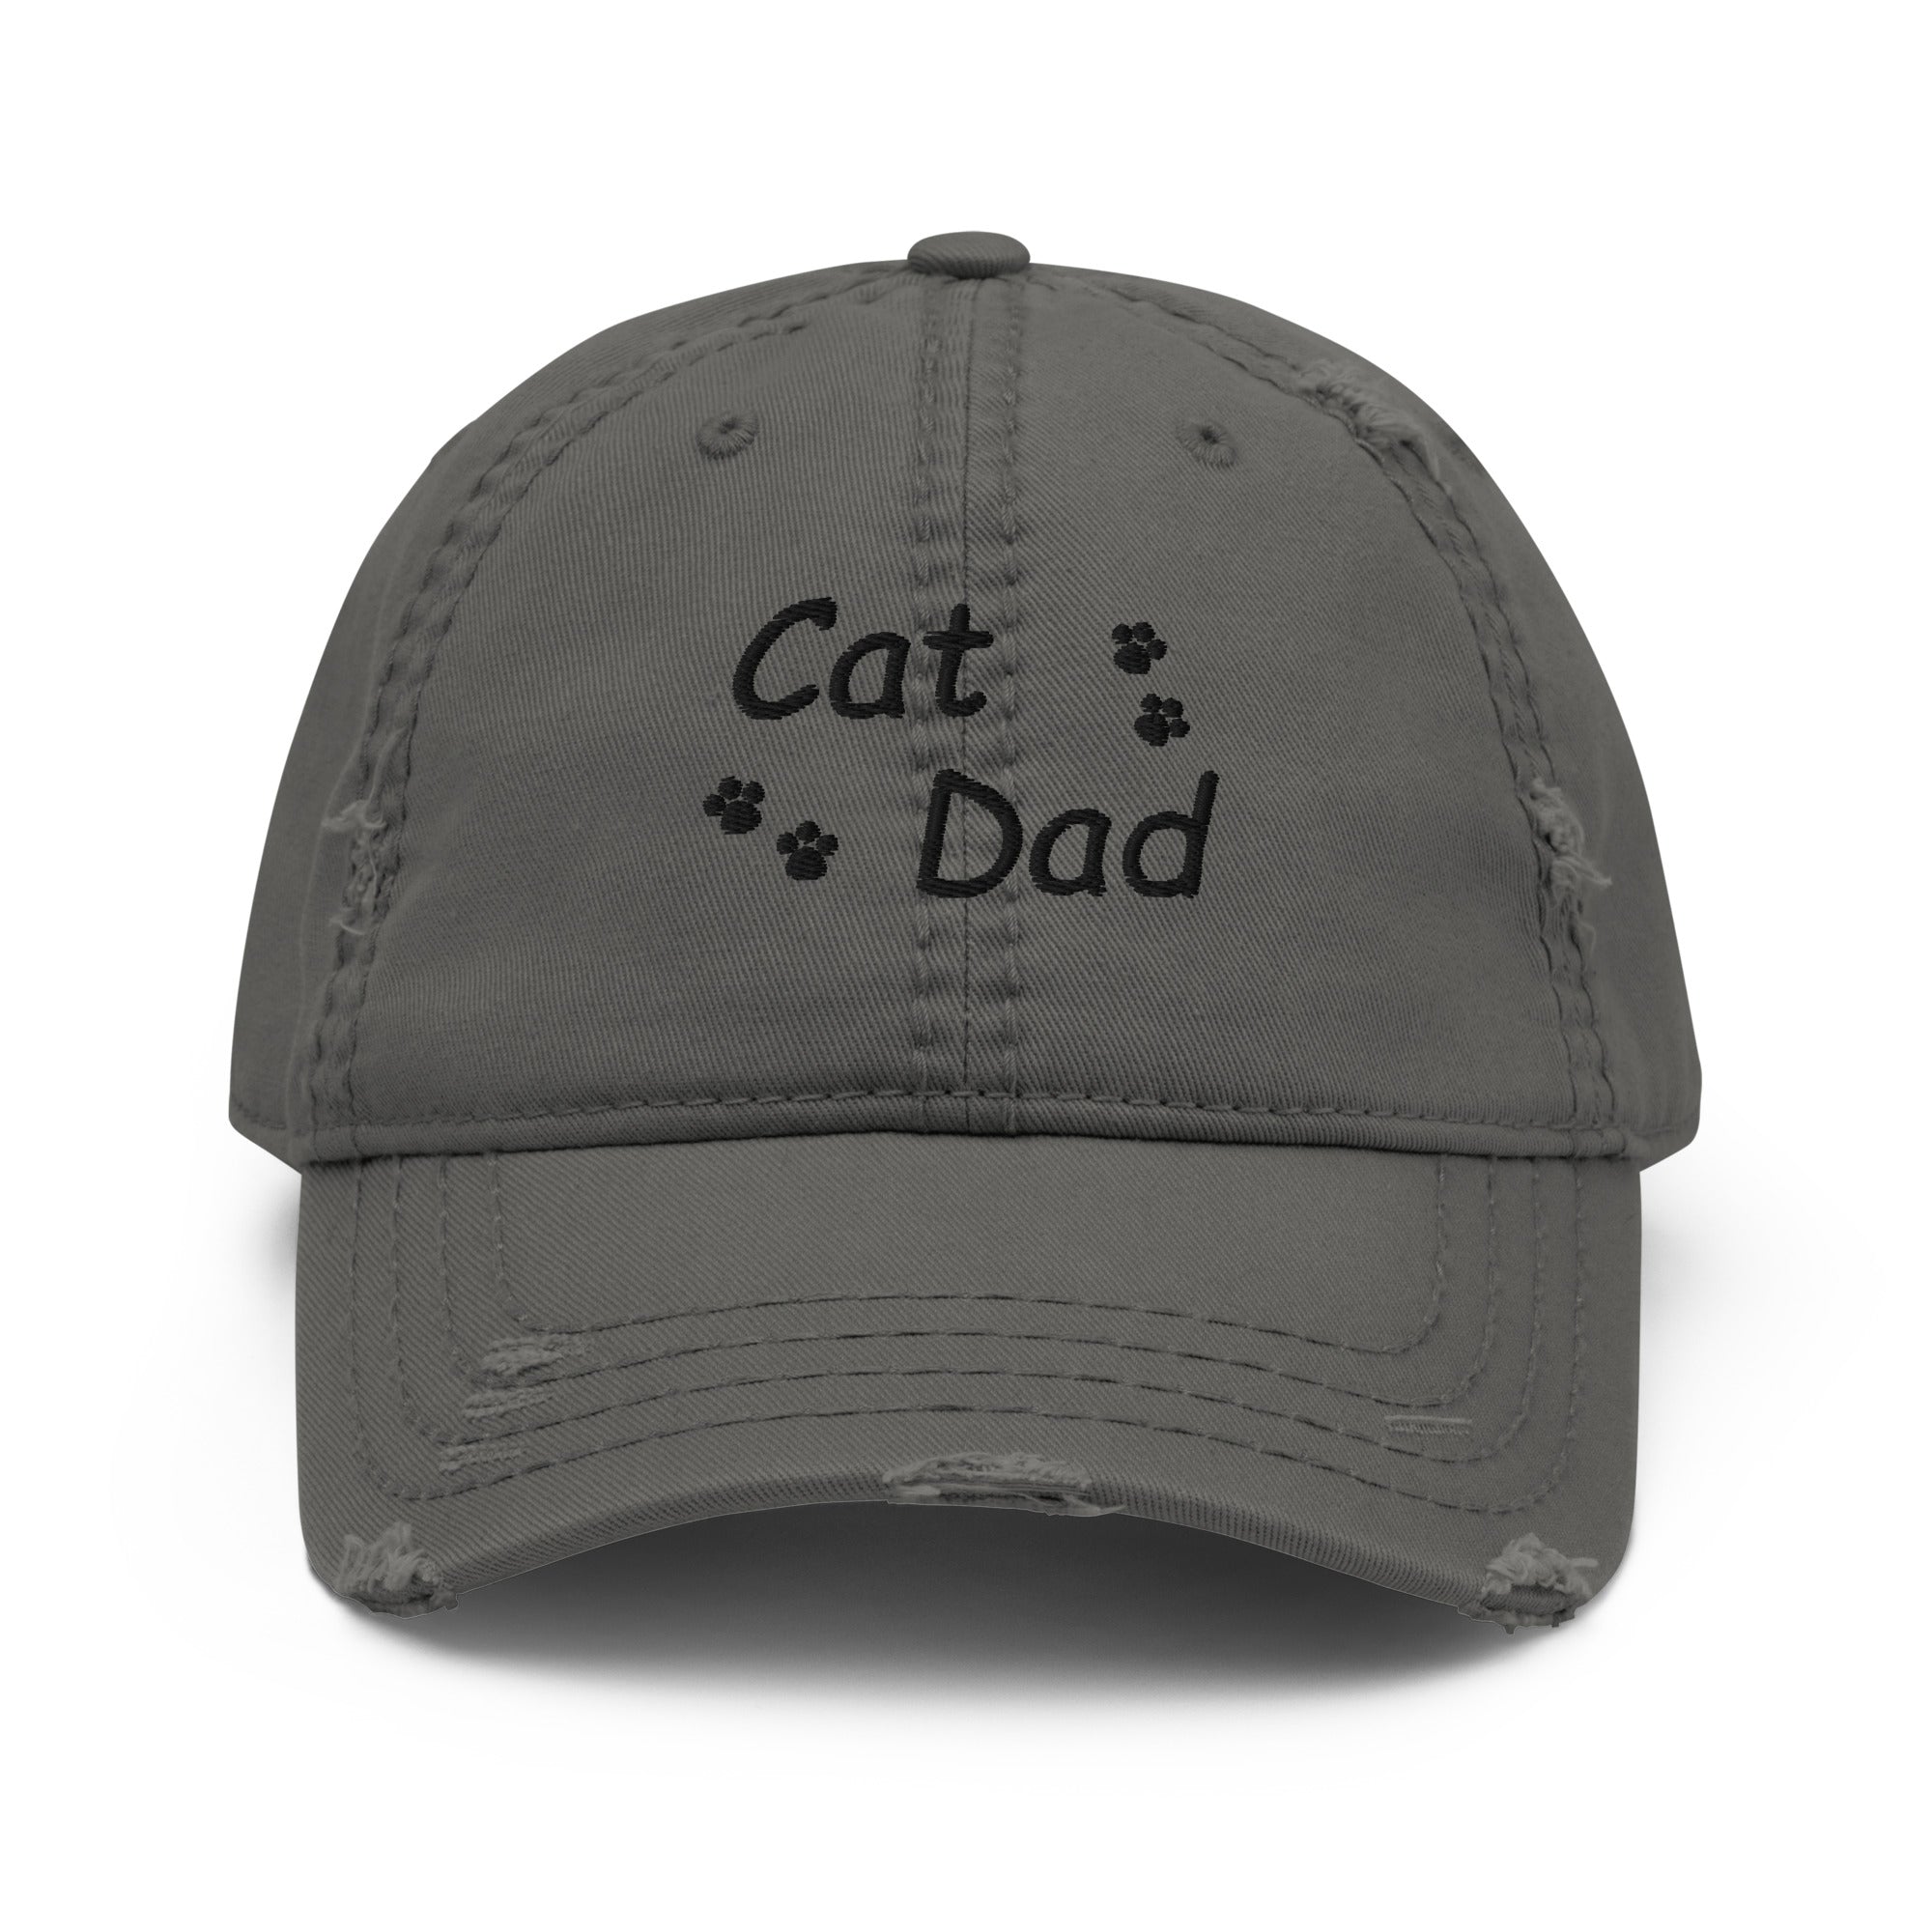 Adjustable Embroidered Distressed Hat for Cat Dads